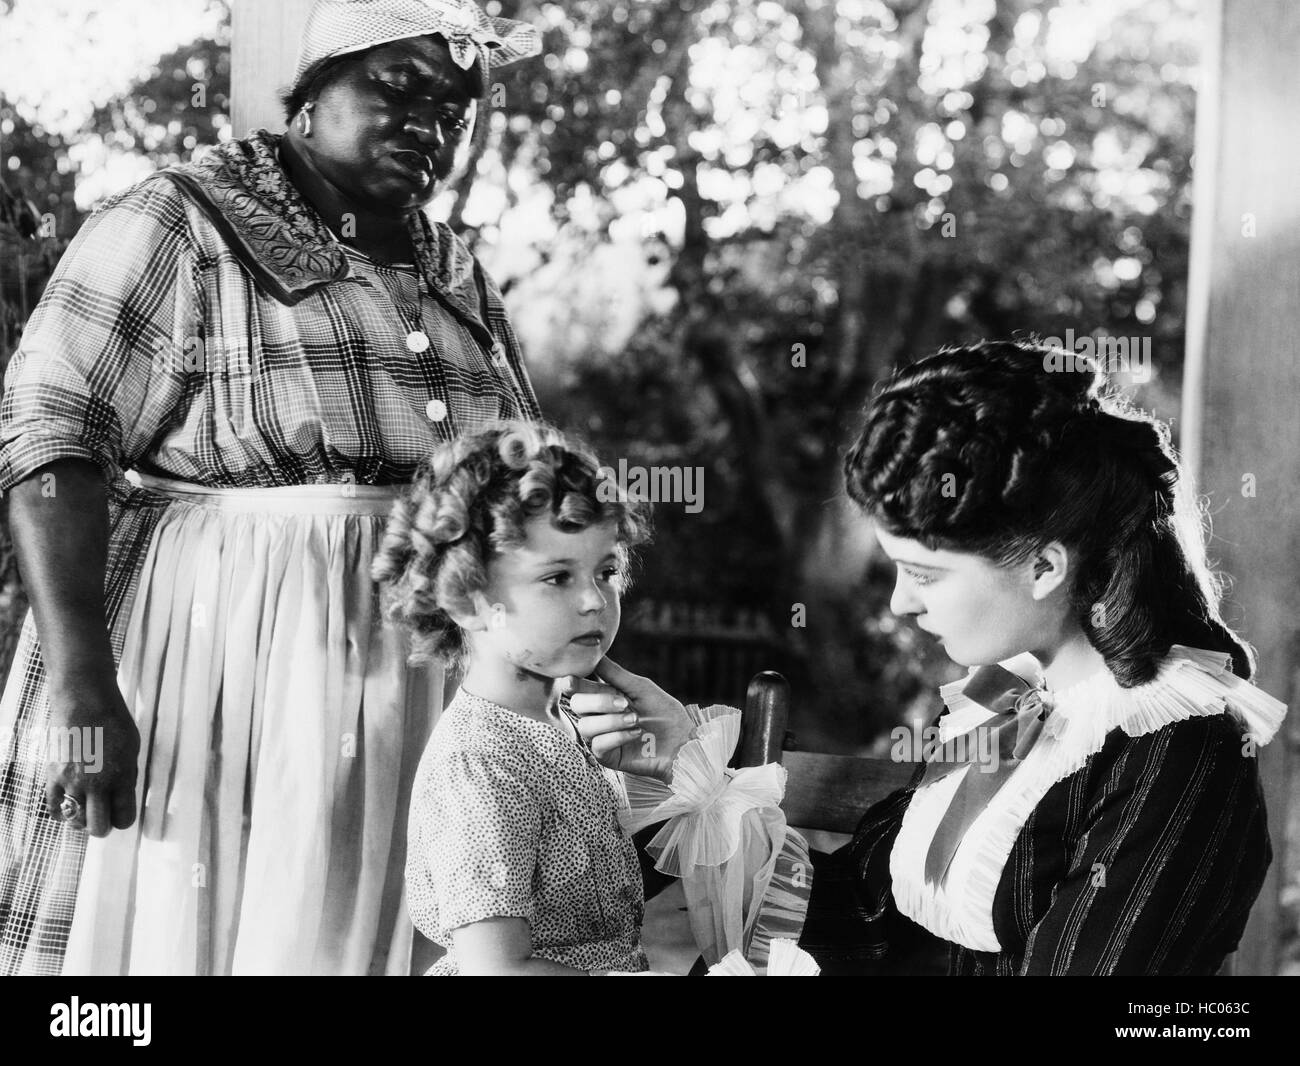 THE LITTLE COLONEL, from left: Hattie McDaniel, Shirley Temple, Evelyn ...